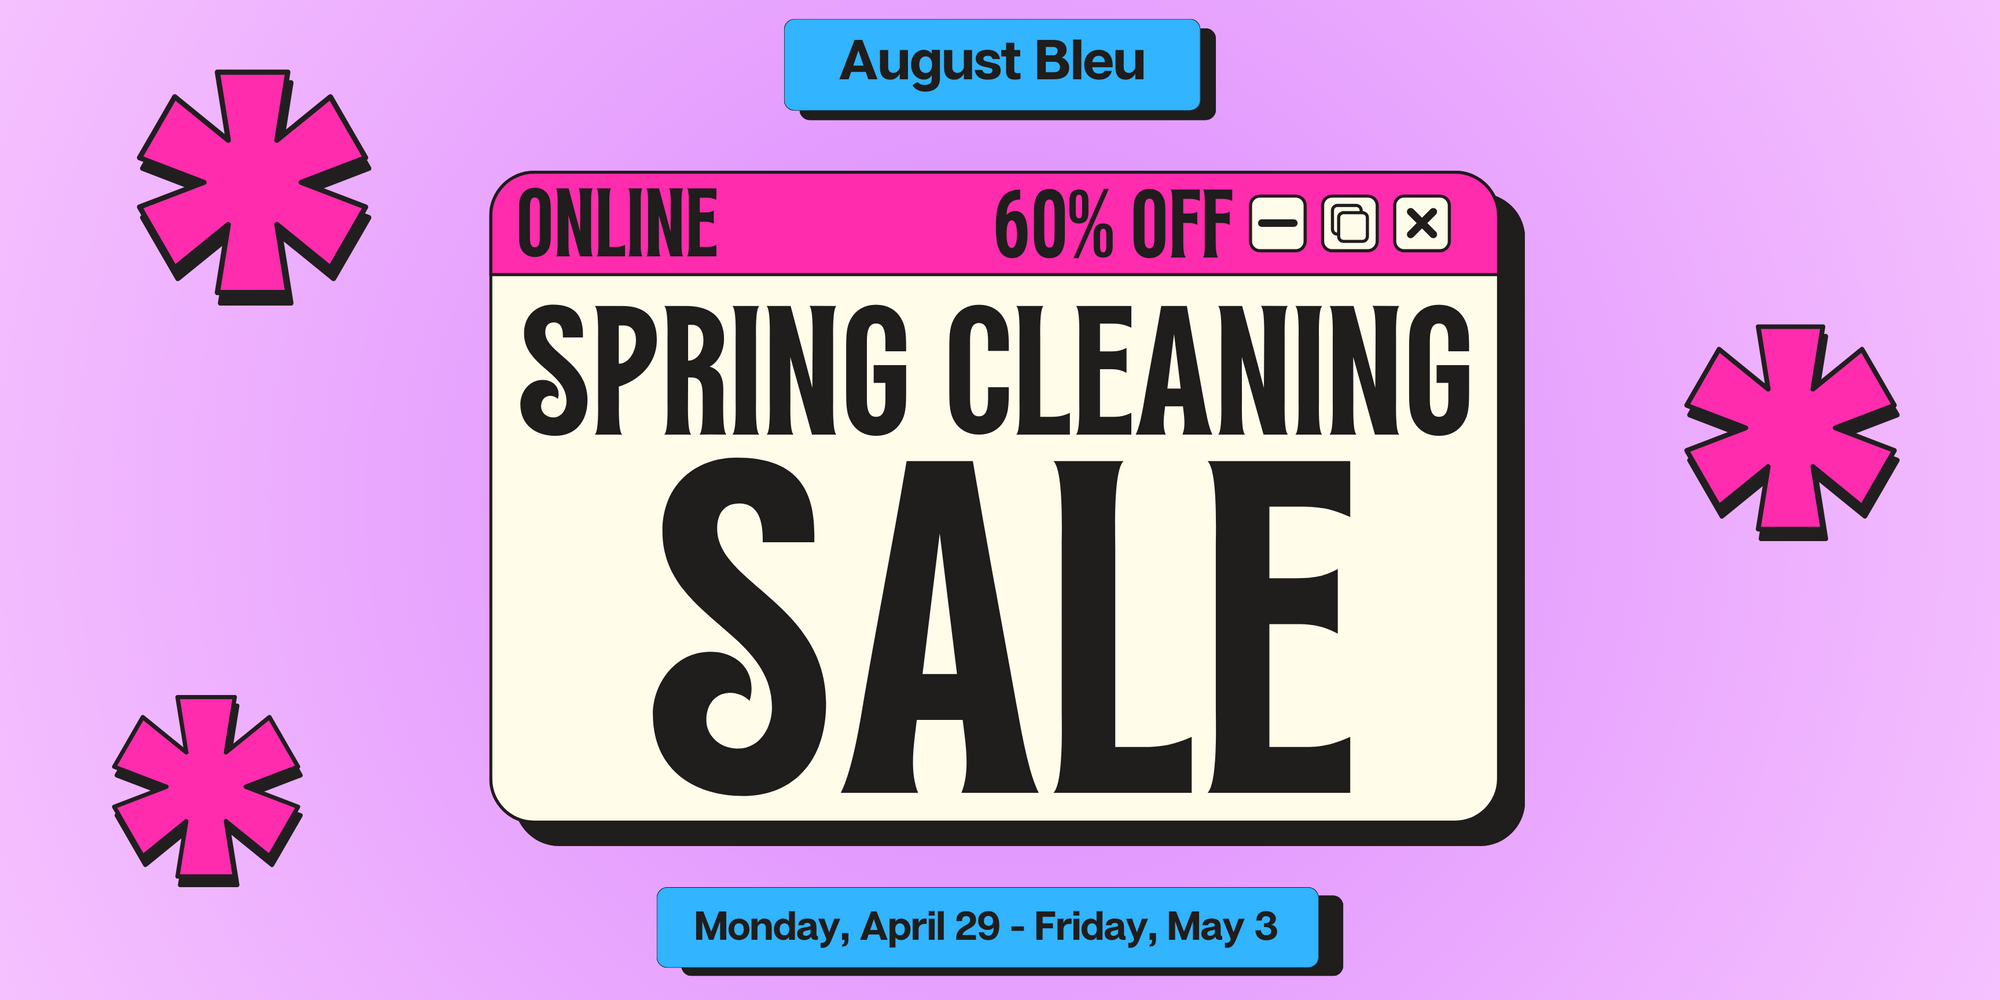 Online Spring Cleaning Sale! Get 60% off your favorite styles!